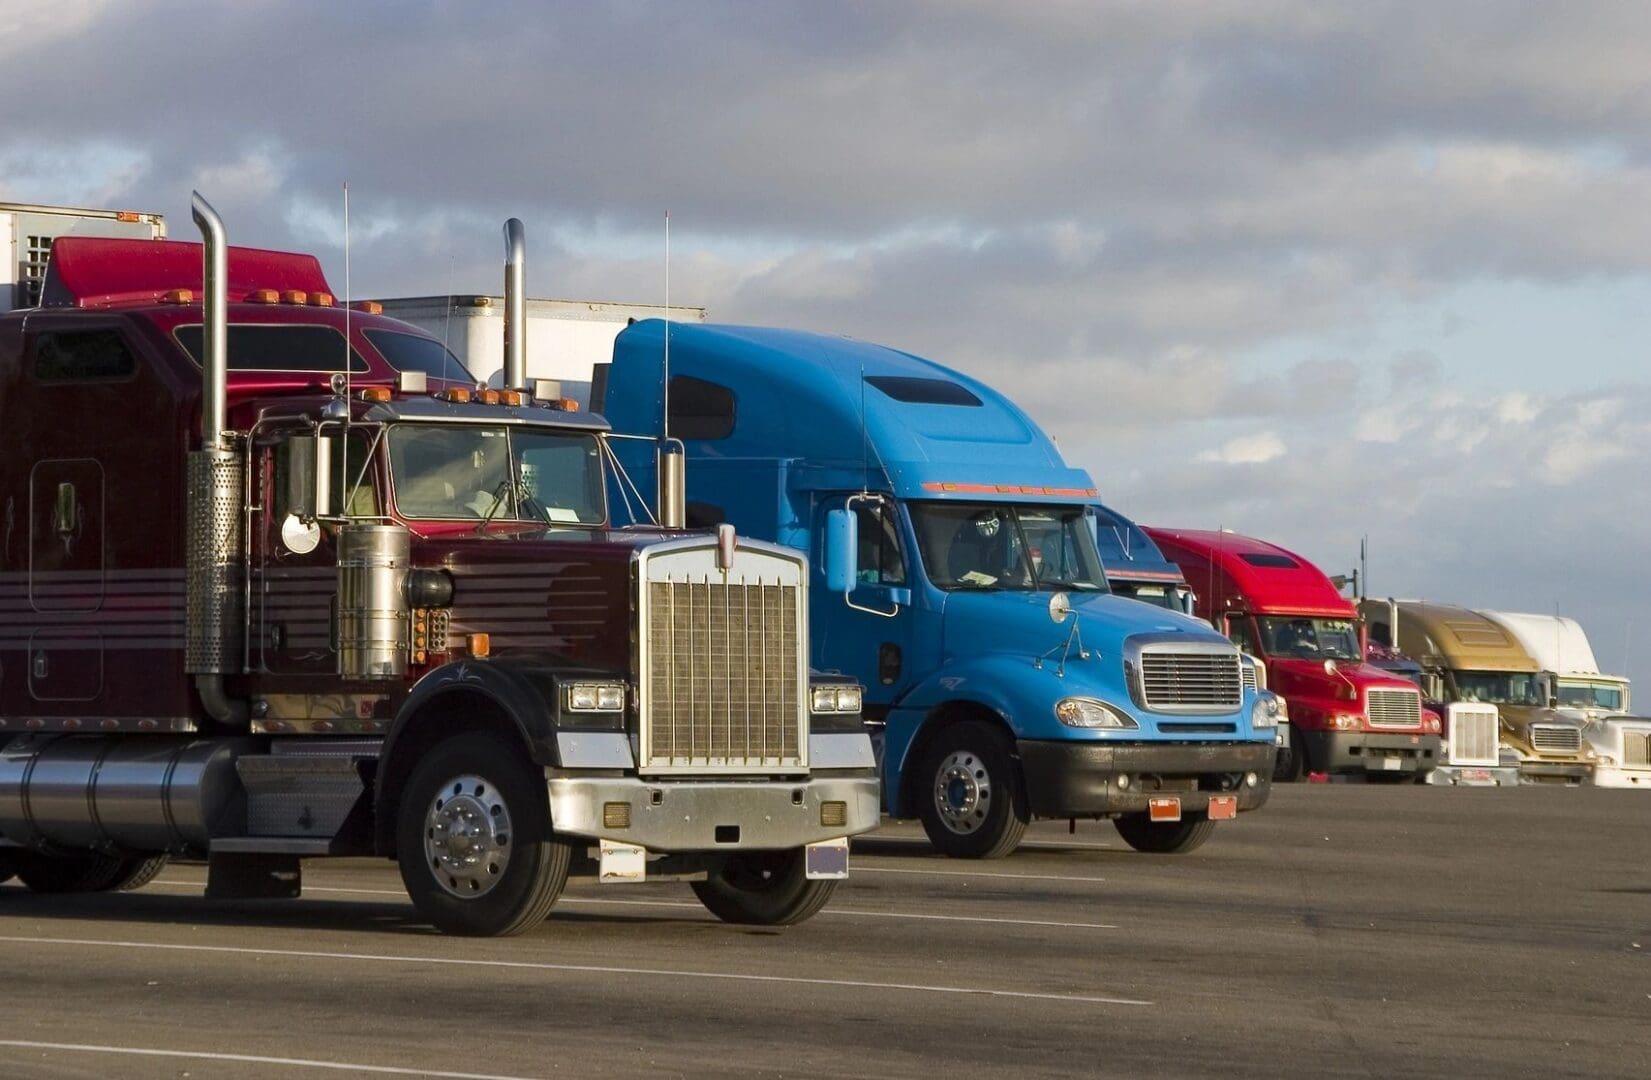 A group of trucks parked on the side of a road.